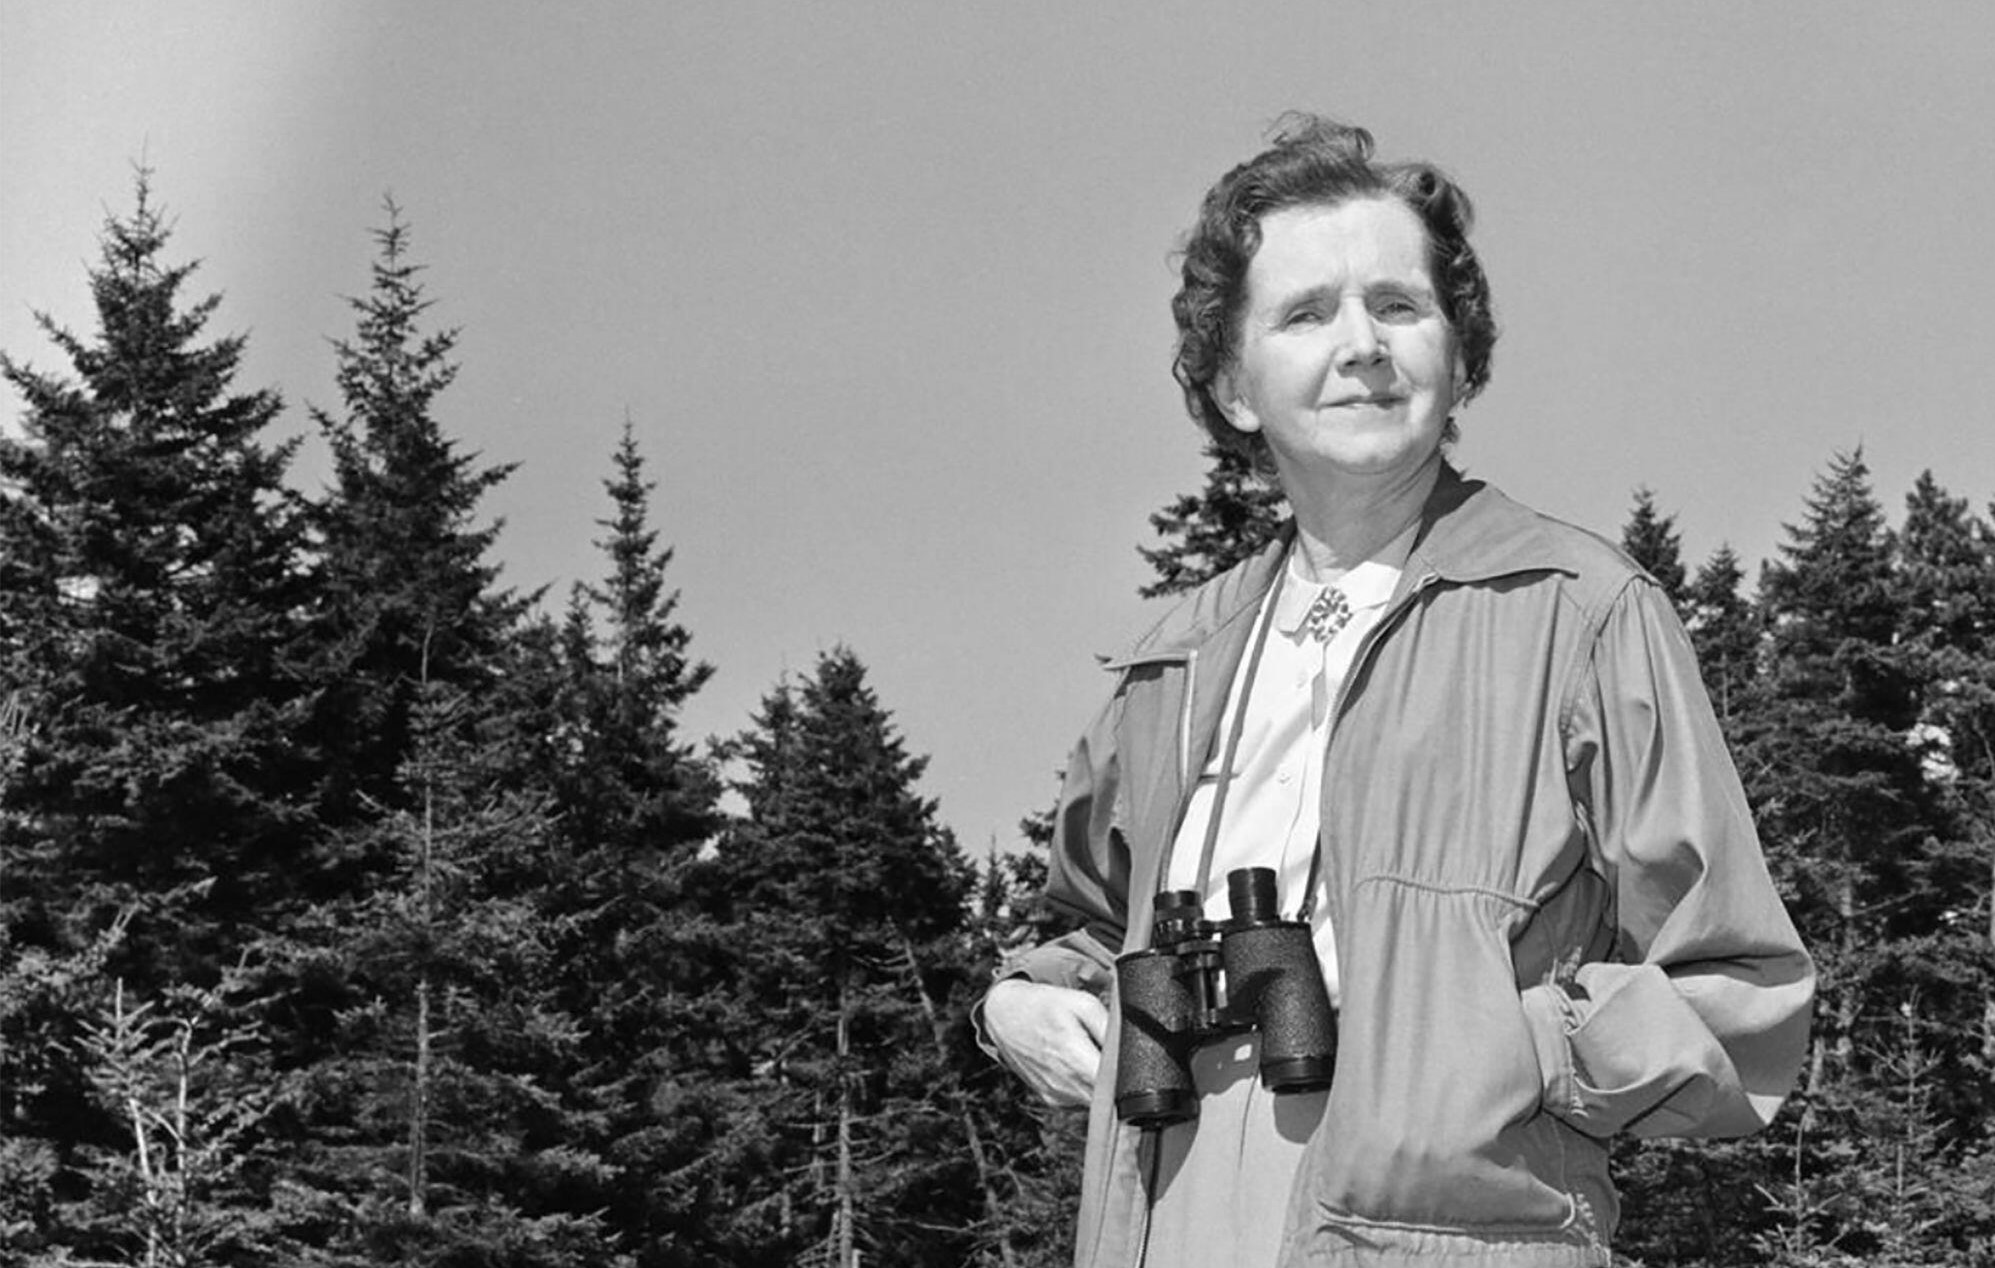 Rachel Carson with binoculars around her neck and a forest in the background